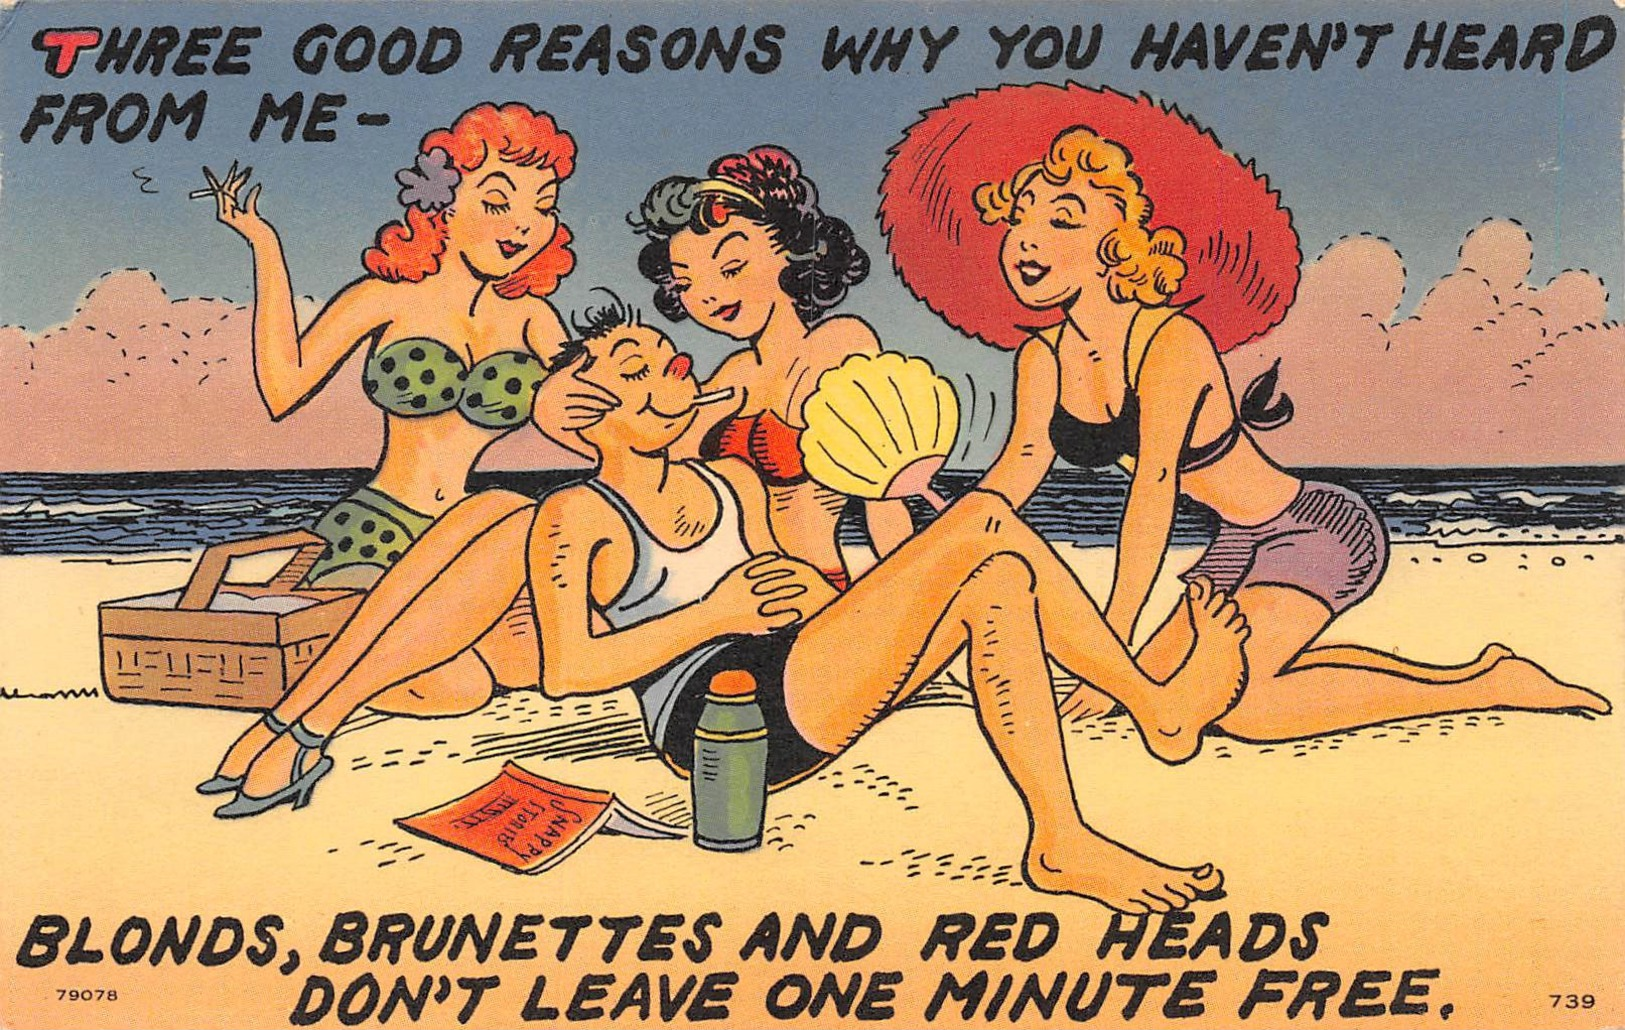 HUMOUR // PIN-UPS // " 3 GOOD REASONS WHY YOU HAVEN'T HEARD. BLONDS, BRUNETTES AND RED HEADS DON'T LEAVE 1 MINUTE FREE. - Pin-Ups